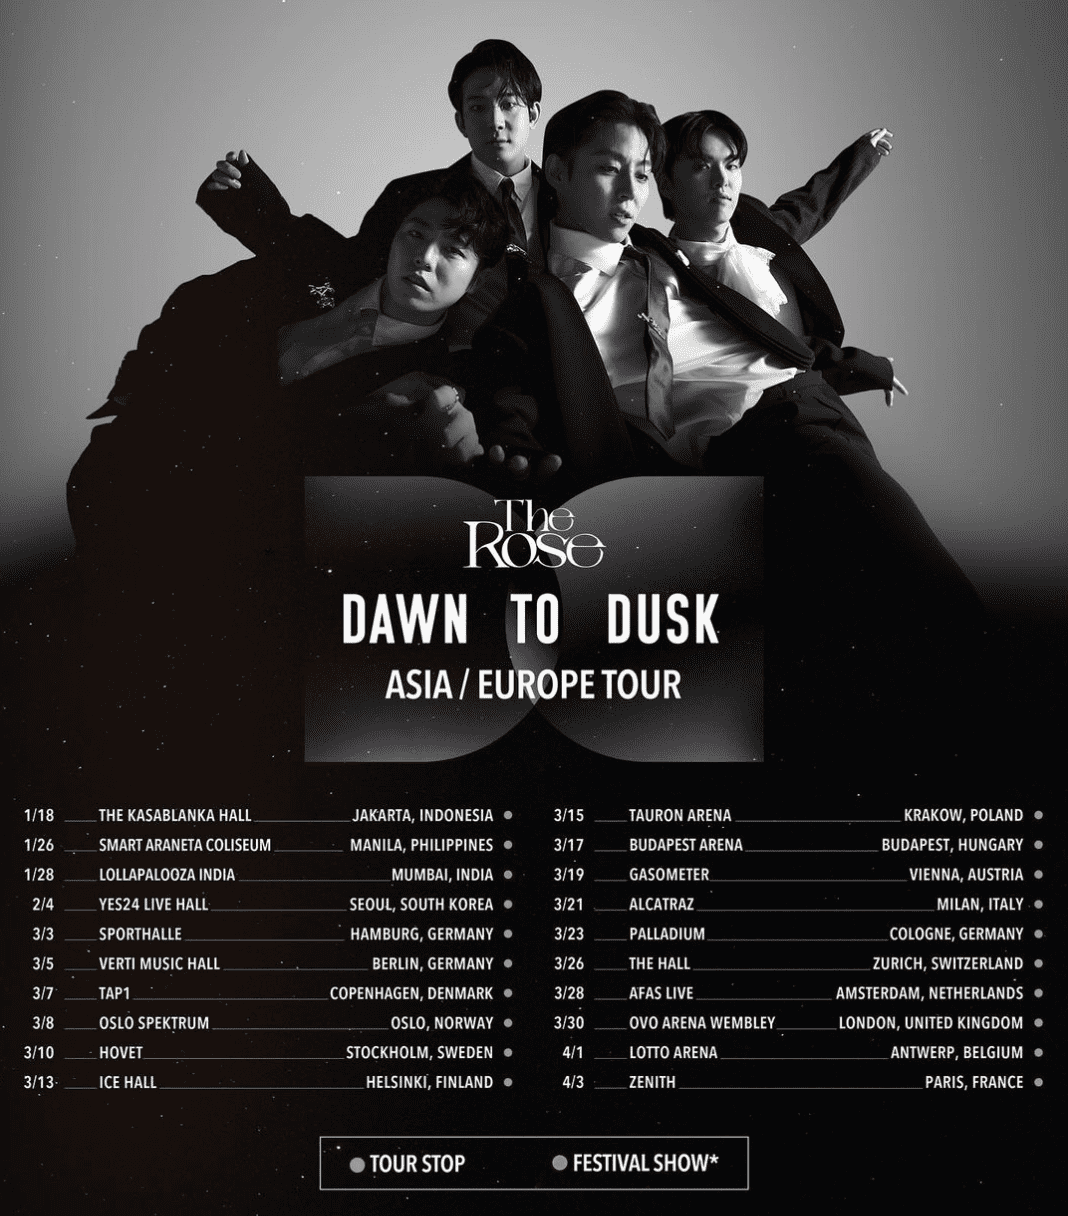 THE ROSE - ‘DAWN TO DUSK’ ASIA/ EUROPE TOUR Poster